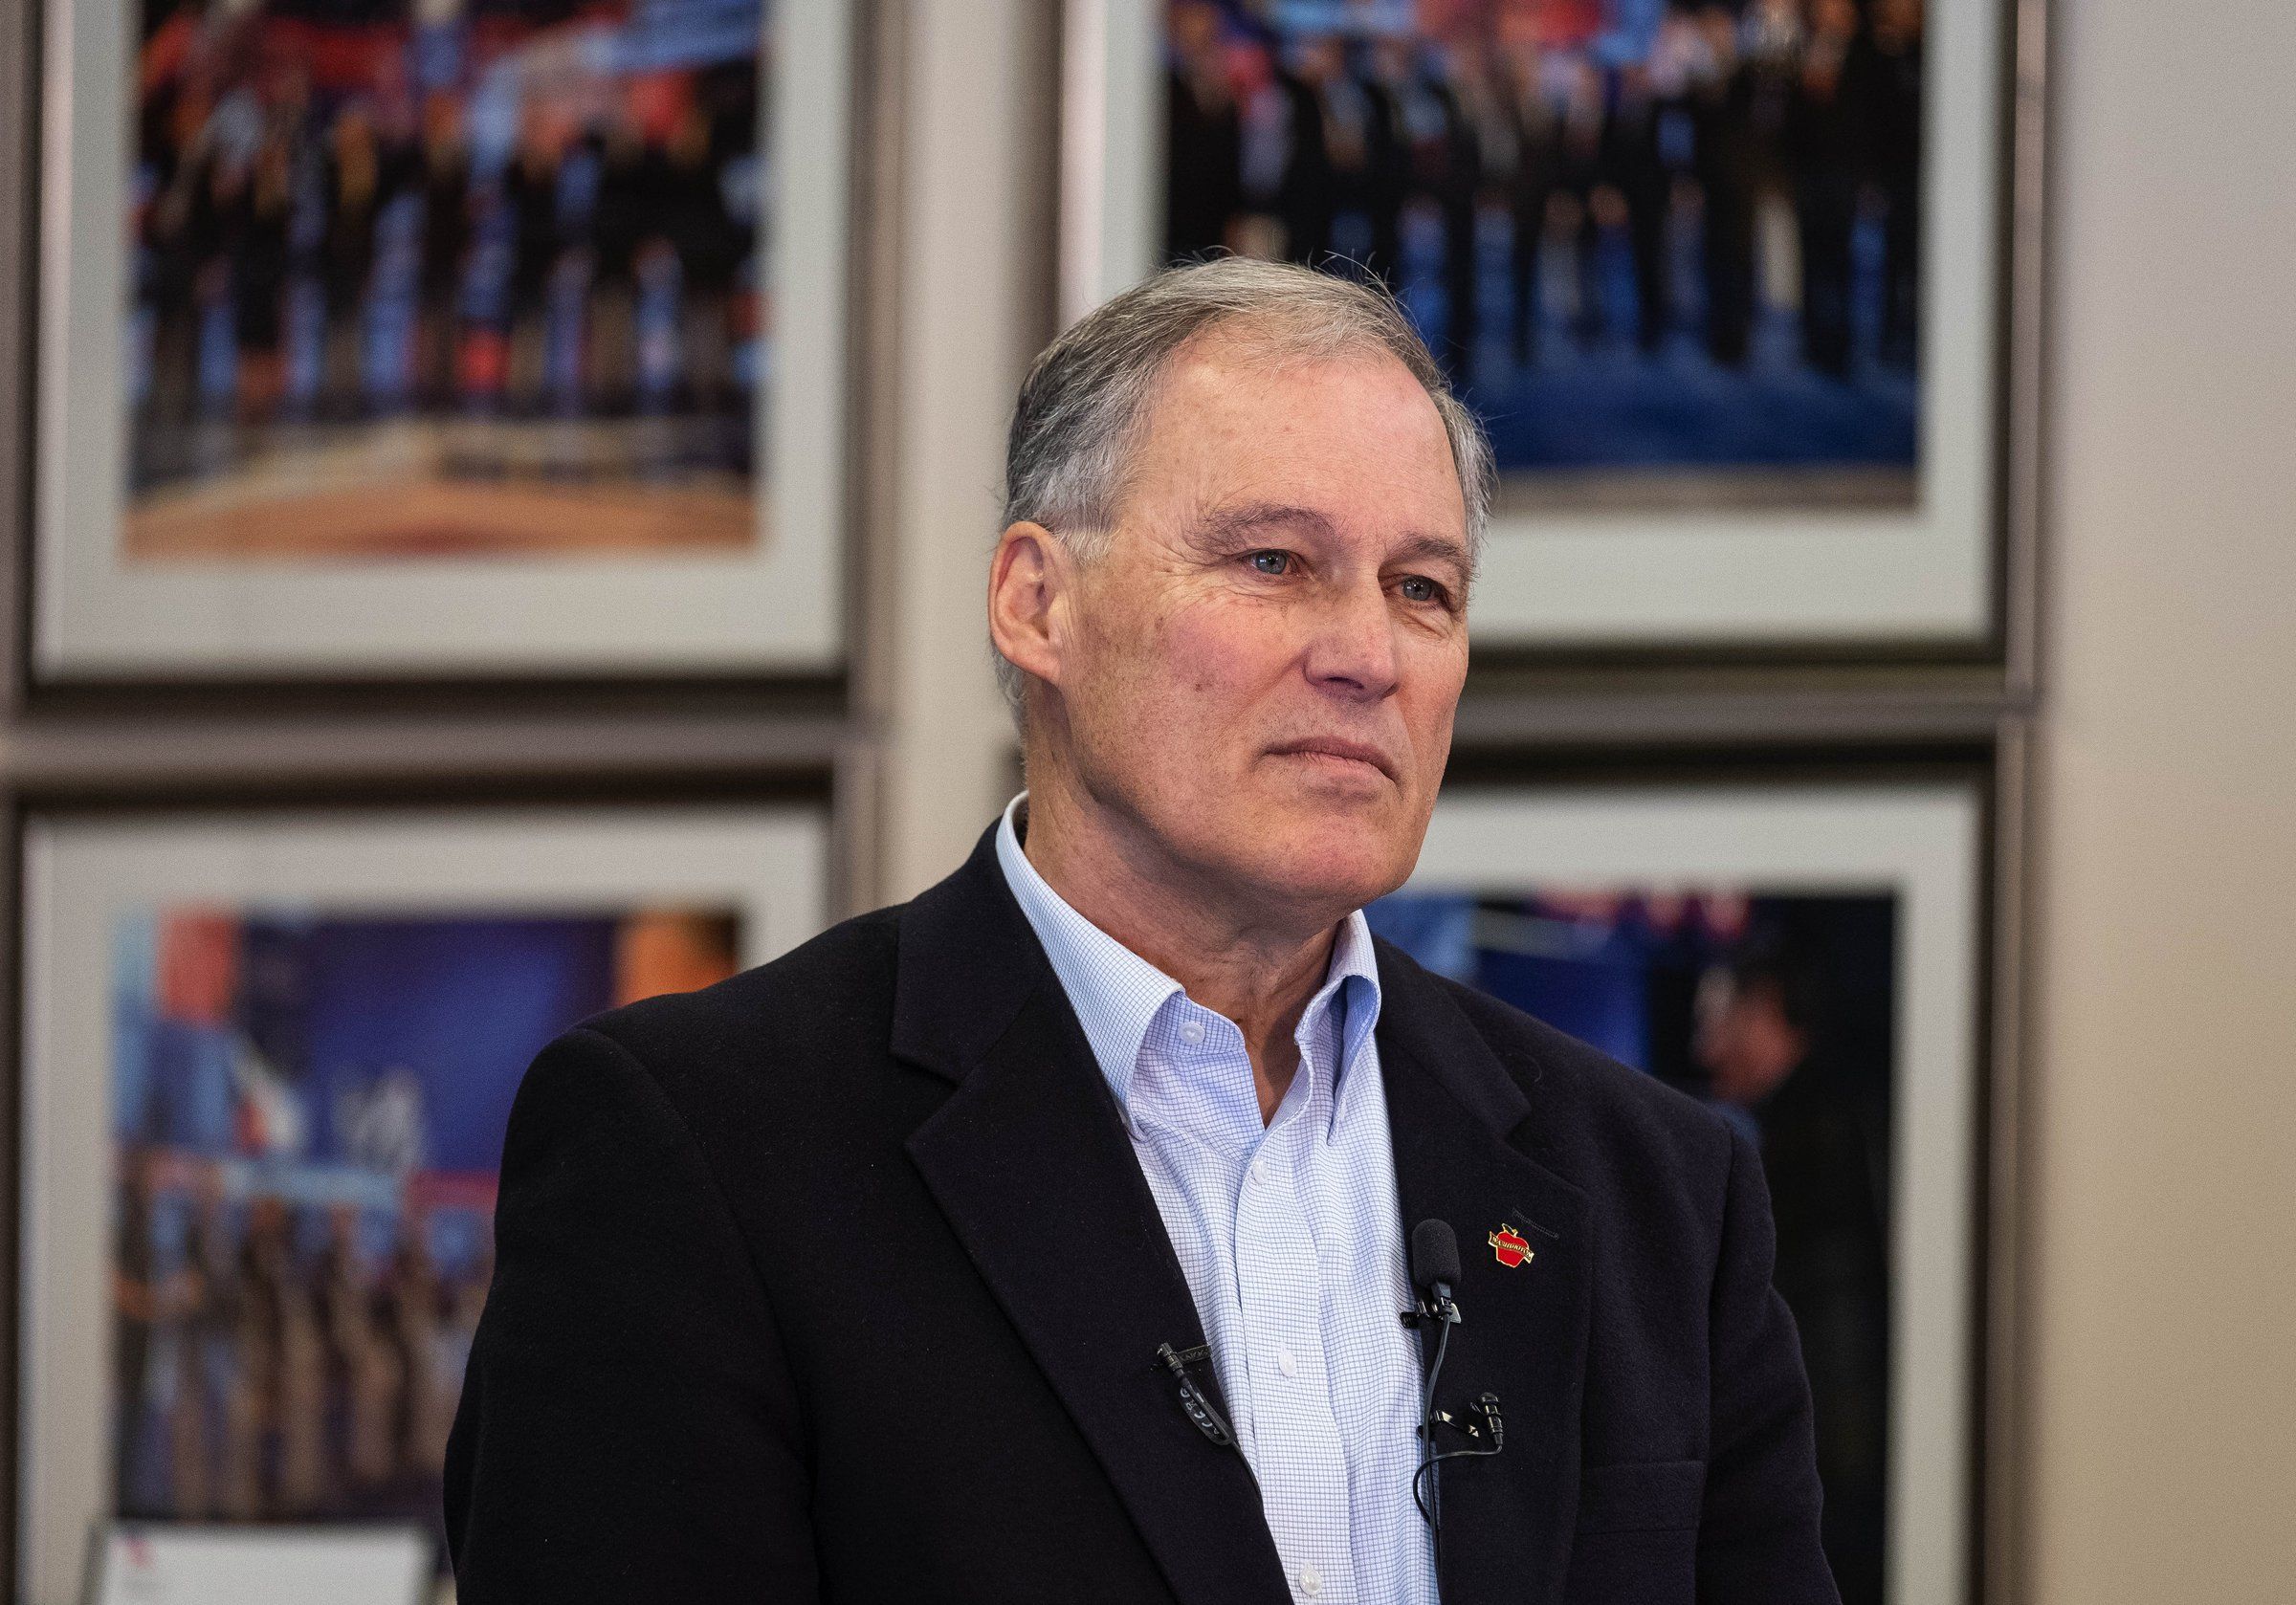 2020 Jay Inslee for President Campaign Button Set 